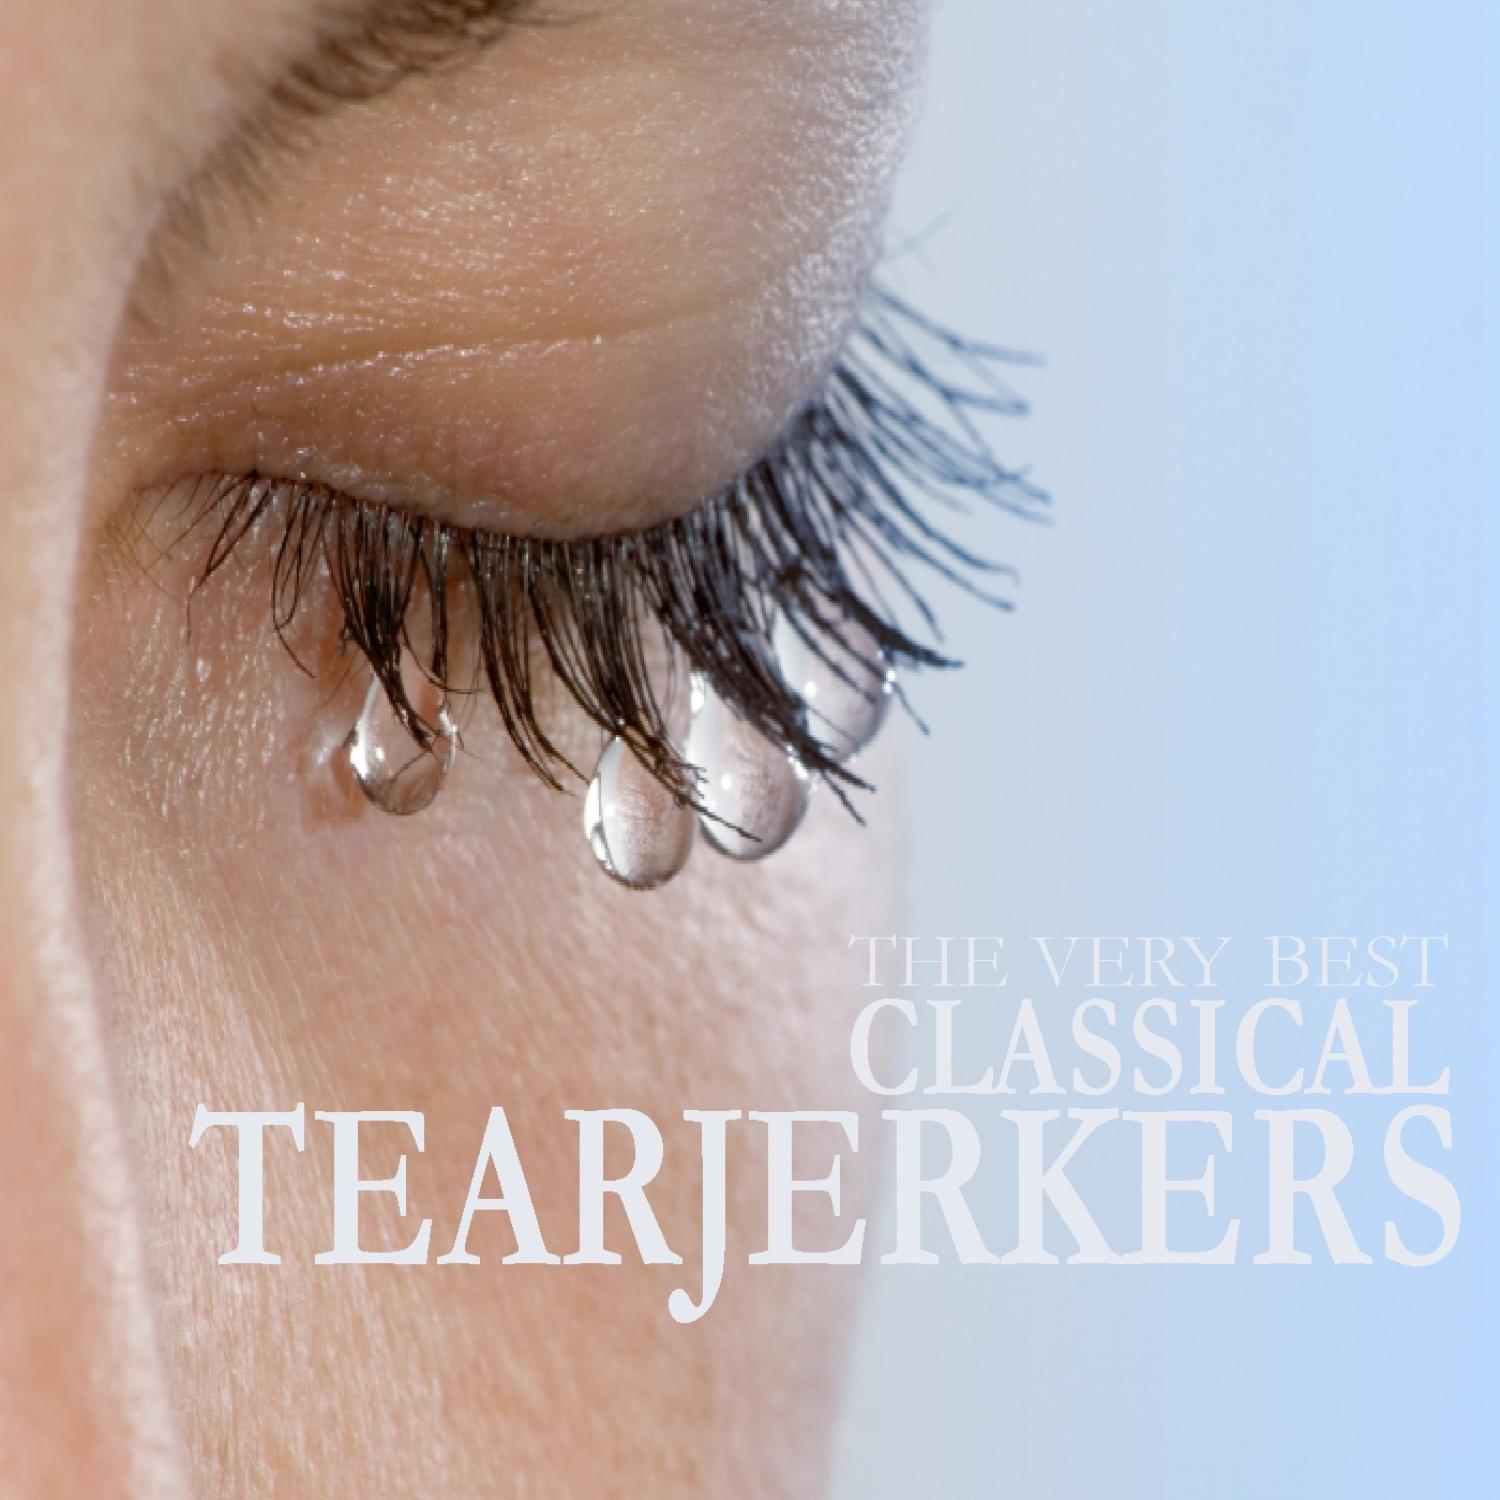 The Very Best Classical Tear Jerkers